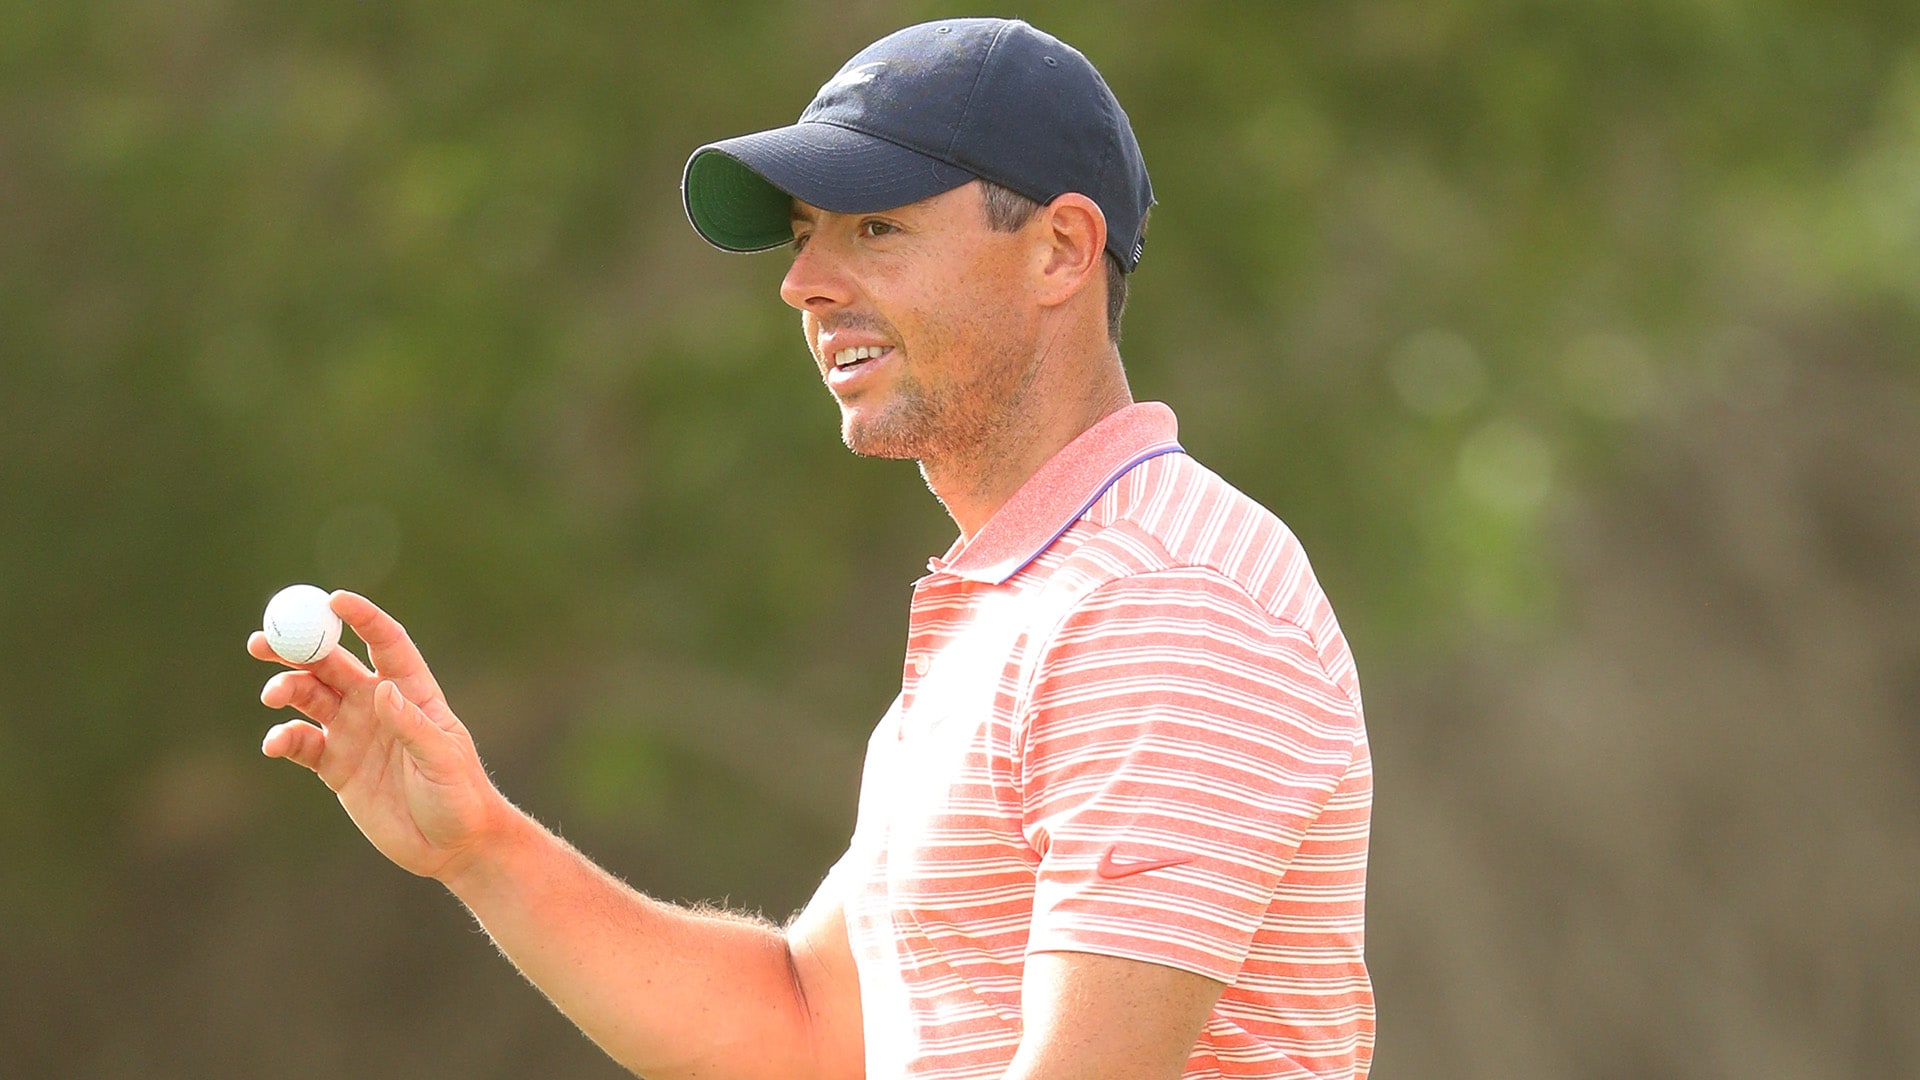 Is it finally Rory McIlroy’s turn in Abu Dhabi? He leads by one after 54 holes